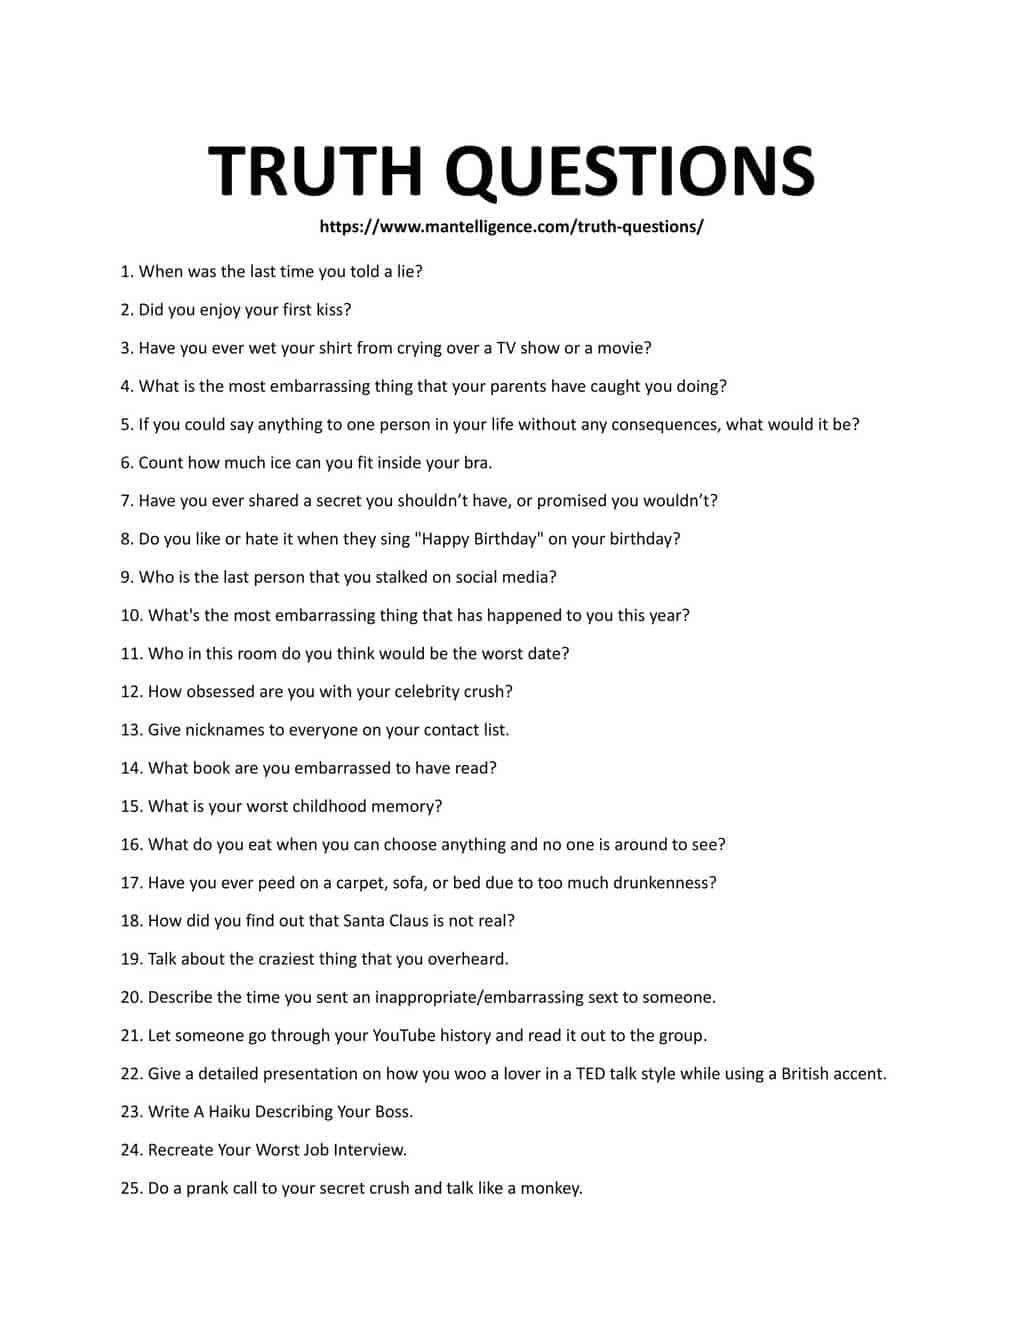 Downloadable and Printable List of Truth Questions